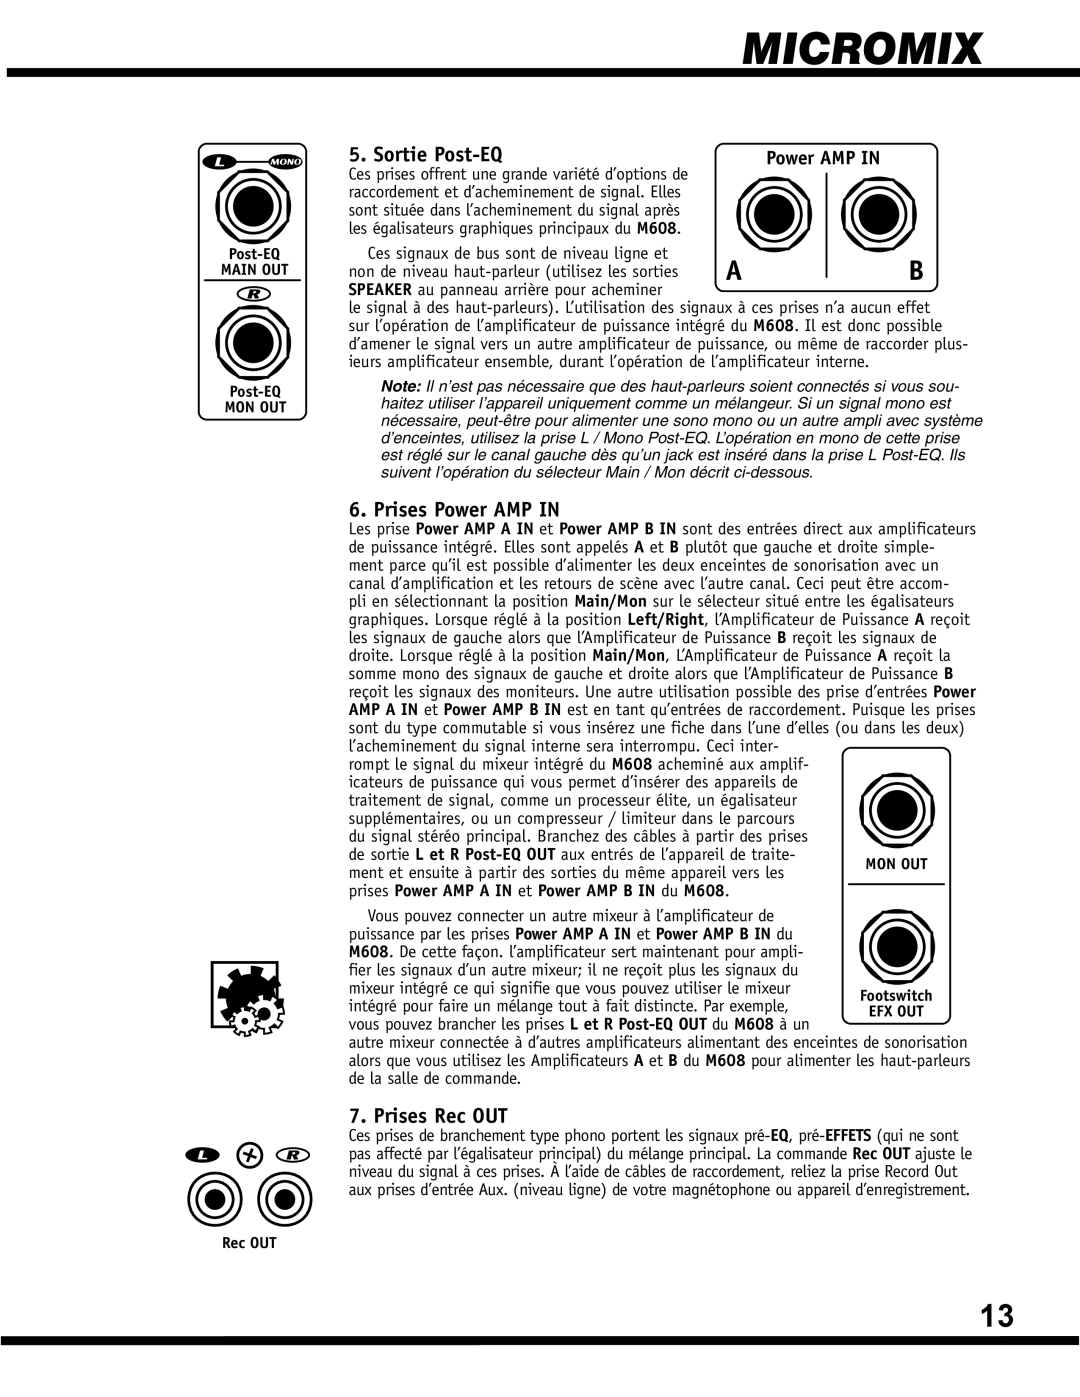 Yorkville Sound YS 1088 manual Sortie Post-EQ, Prises Power AMP IN, Prises Rec OUT, Micromix 